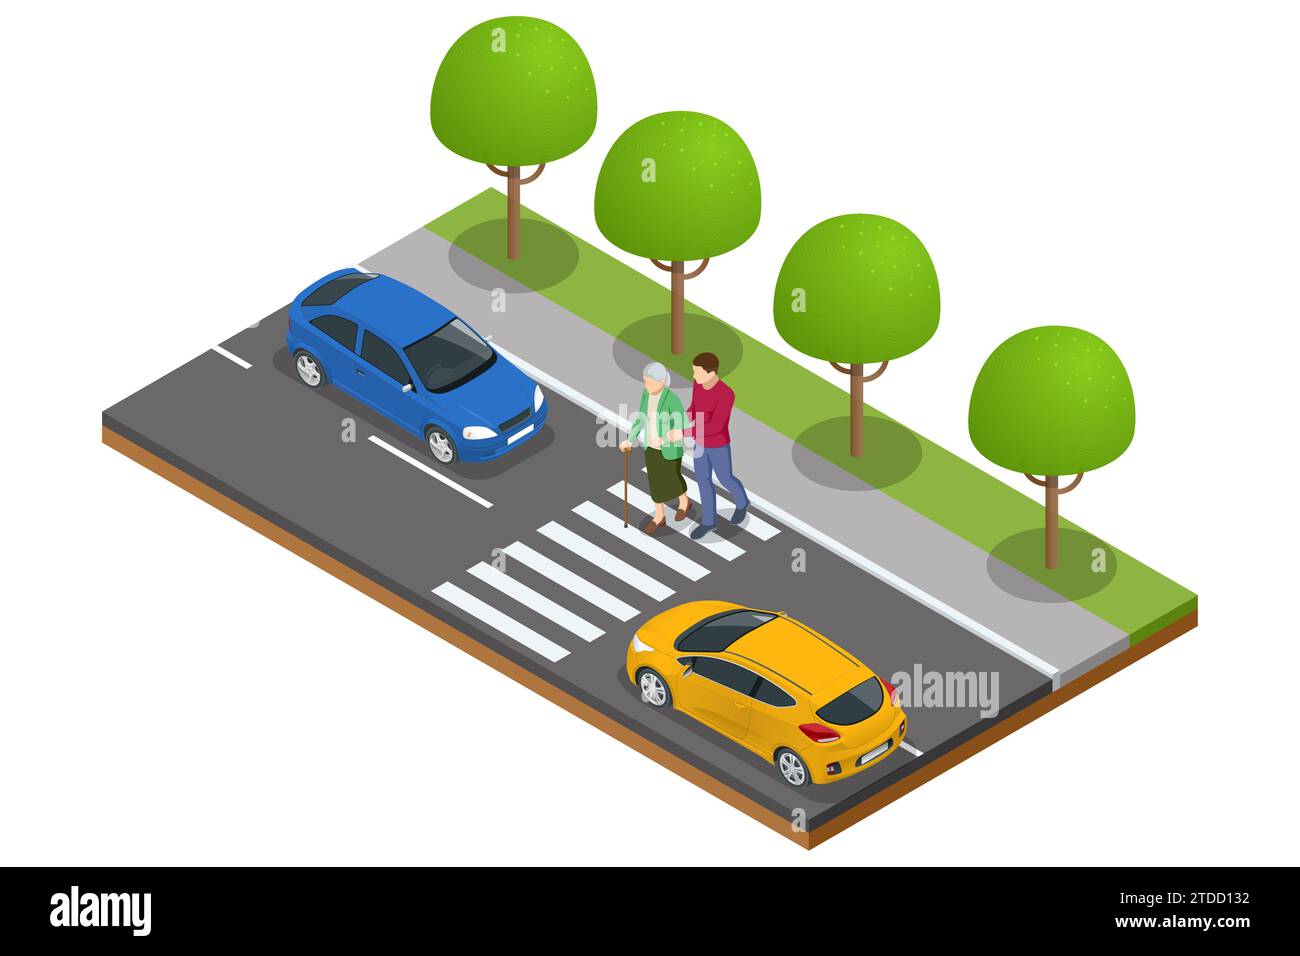 Isometric concept of helping the elderly in the city. A man helps an old woman cross the road at a pedestrian crossing Stock Vector